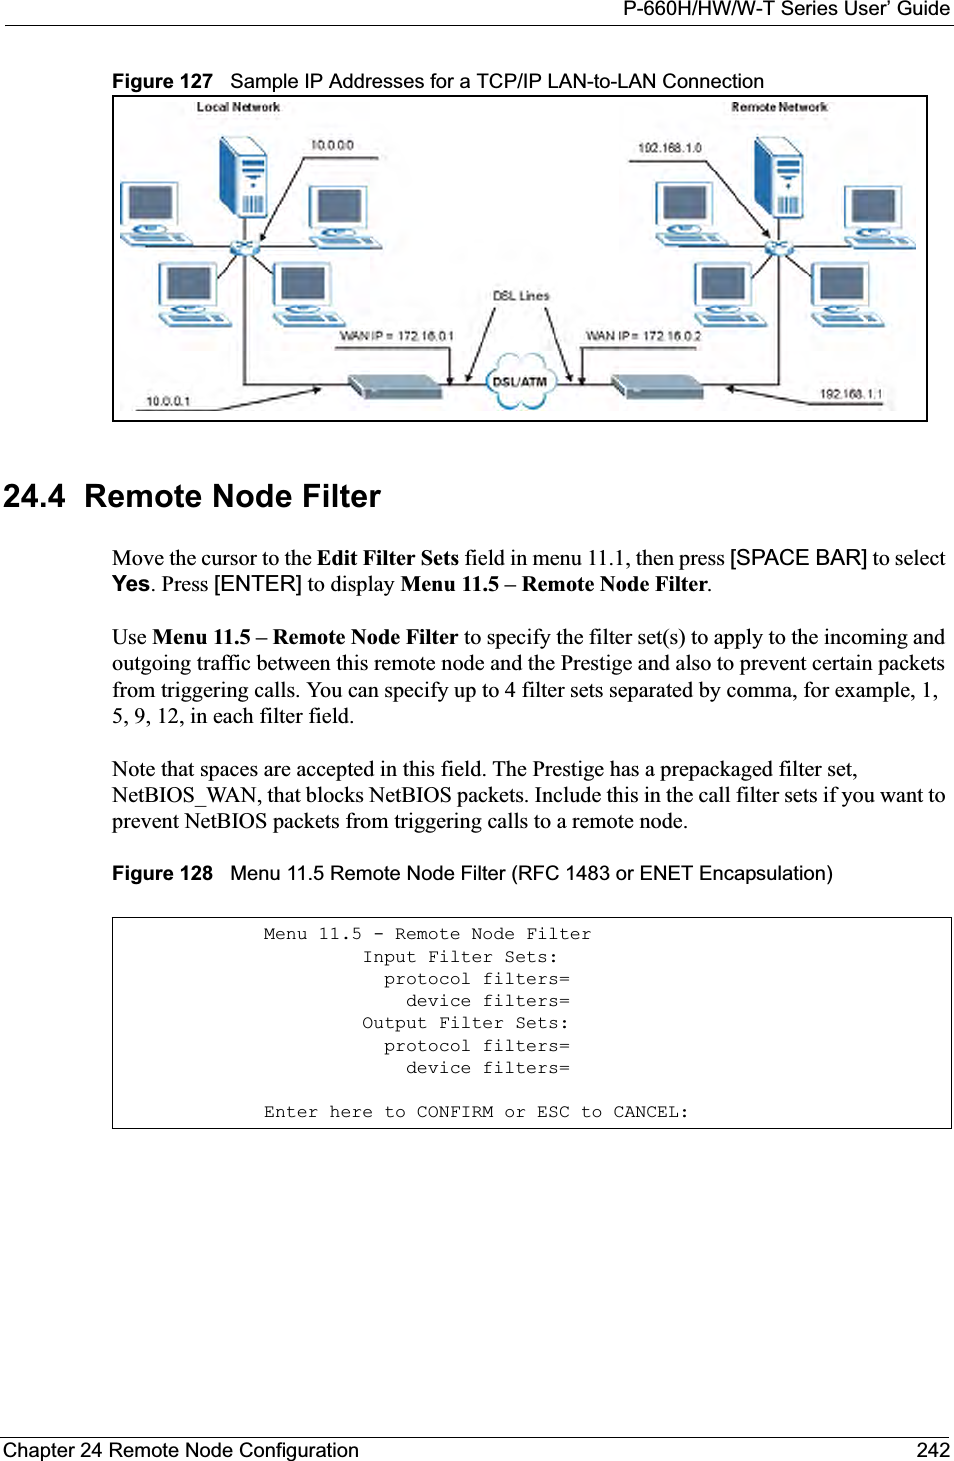 P-660H/HW/W-T Series User’ GuideChapter 24 Remote Node Configuration 242Figure 127   Sample IP Addresses for a TCP/IP LAN-to-LAN Connection24.4  Remote Node FilterMove the cursor to the Edit Filter Sets field in menu 11.1, then press [SPACE BAR] to select Yes. Press [ENTER] to display Menu 11.5 – Remote Node Filter.Use Menu 11.5 – Remote Node Filter to specify the filter set(s) to apply to the incoming and outgoing traffic between this remote node and the Prestige and also to prevent certain packets from triggering calls. You can specify up to 4 filter sets separated by comma, for example, 1, 5, 9, 12, in each filter field.Note that spaces are accepted in this field. The Prestige has a prepackaged filter set, NetBIOS_WAN, that blocks NetBIOS packets. Include this in the call filter sets if you want to prevent NetBIOS packets from triggering calls to a remote node.Figure 128   Menu 11.5 Remote Node Filter (RFC 1483 or ENET Encapsulation)Menu 11.5 - Remote Node Filter         Input Filter Sets:           protocol filters=             device filters=         Output Filter Sets:           protocol filters=             device filters=Enter here to CONFIRM or ESC to CANCEL: